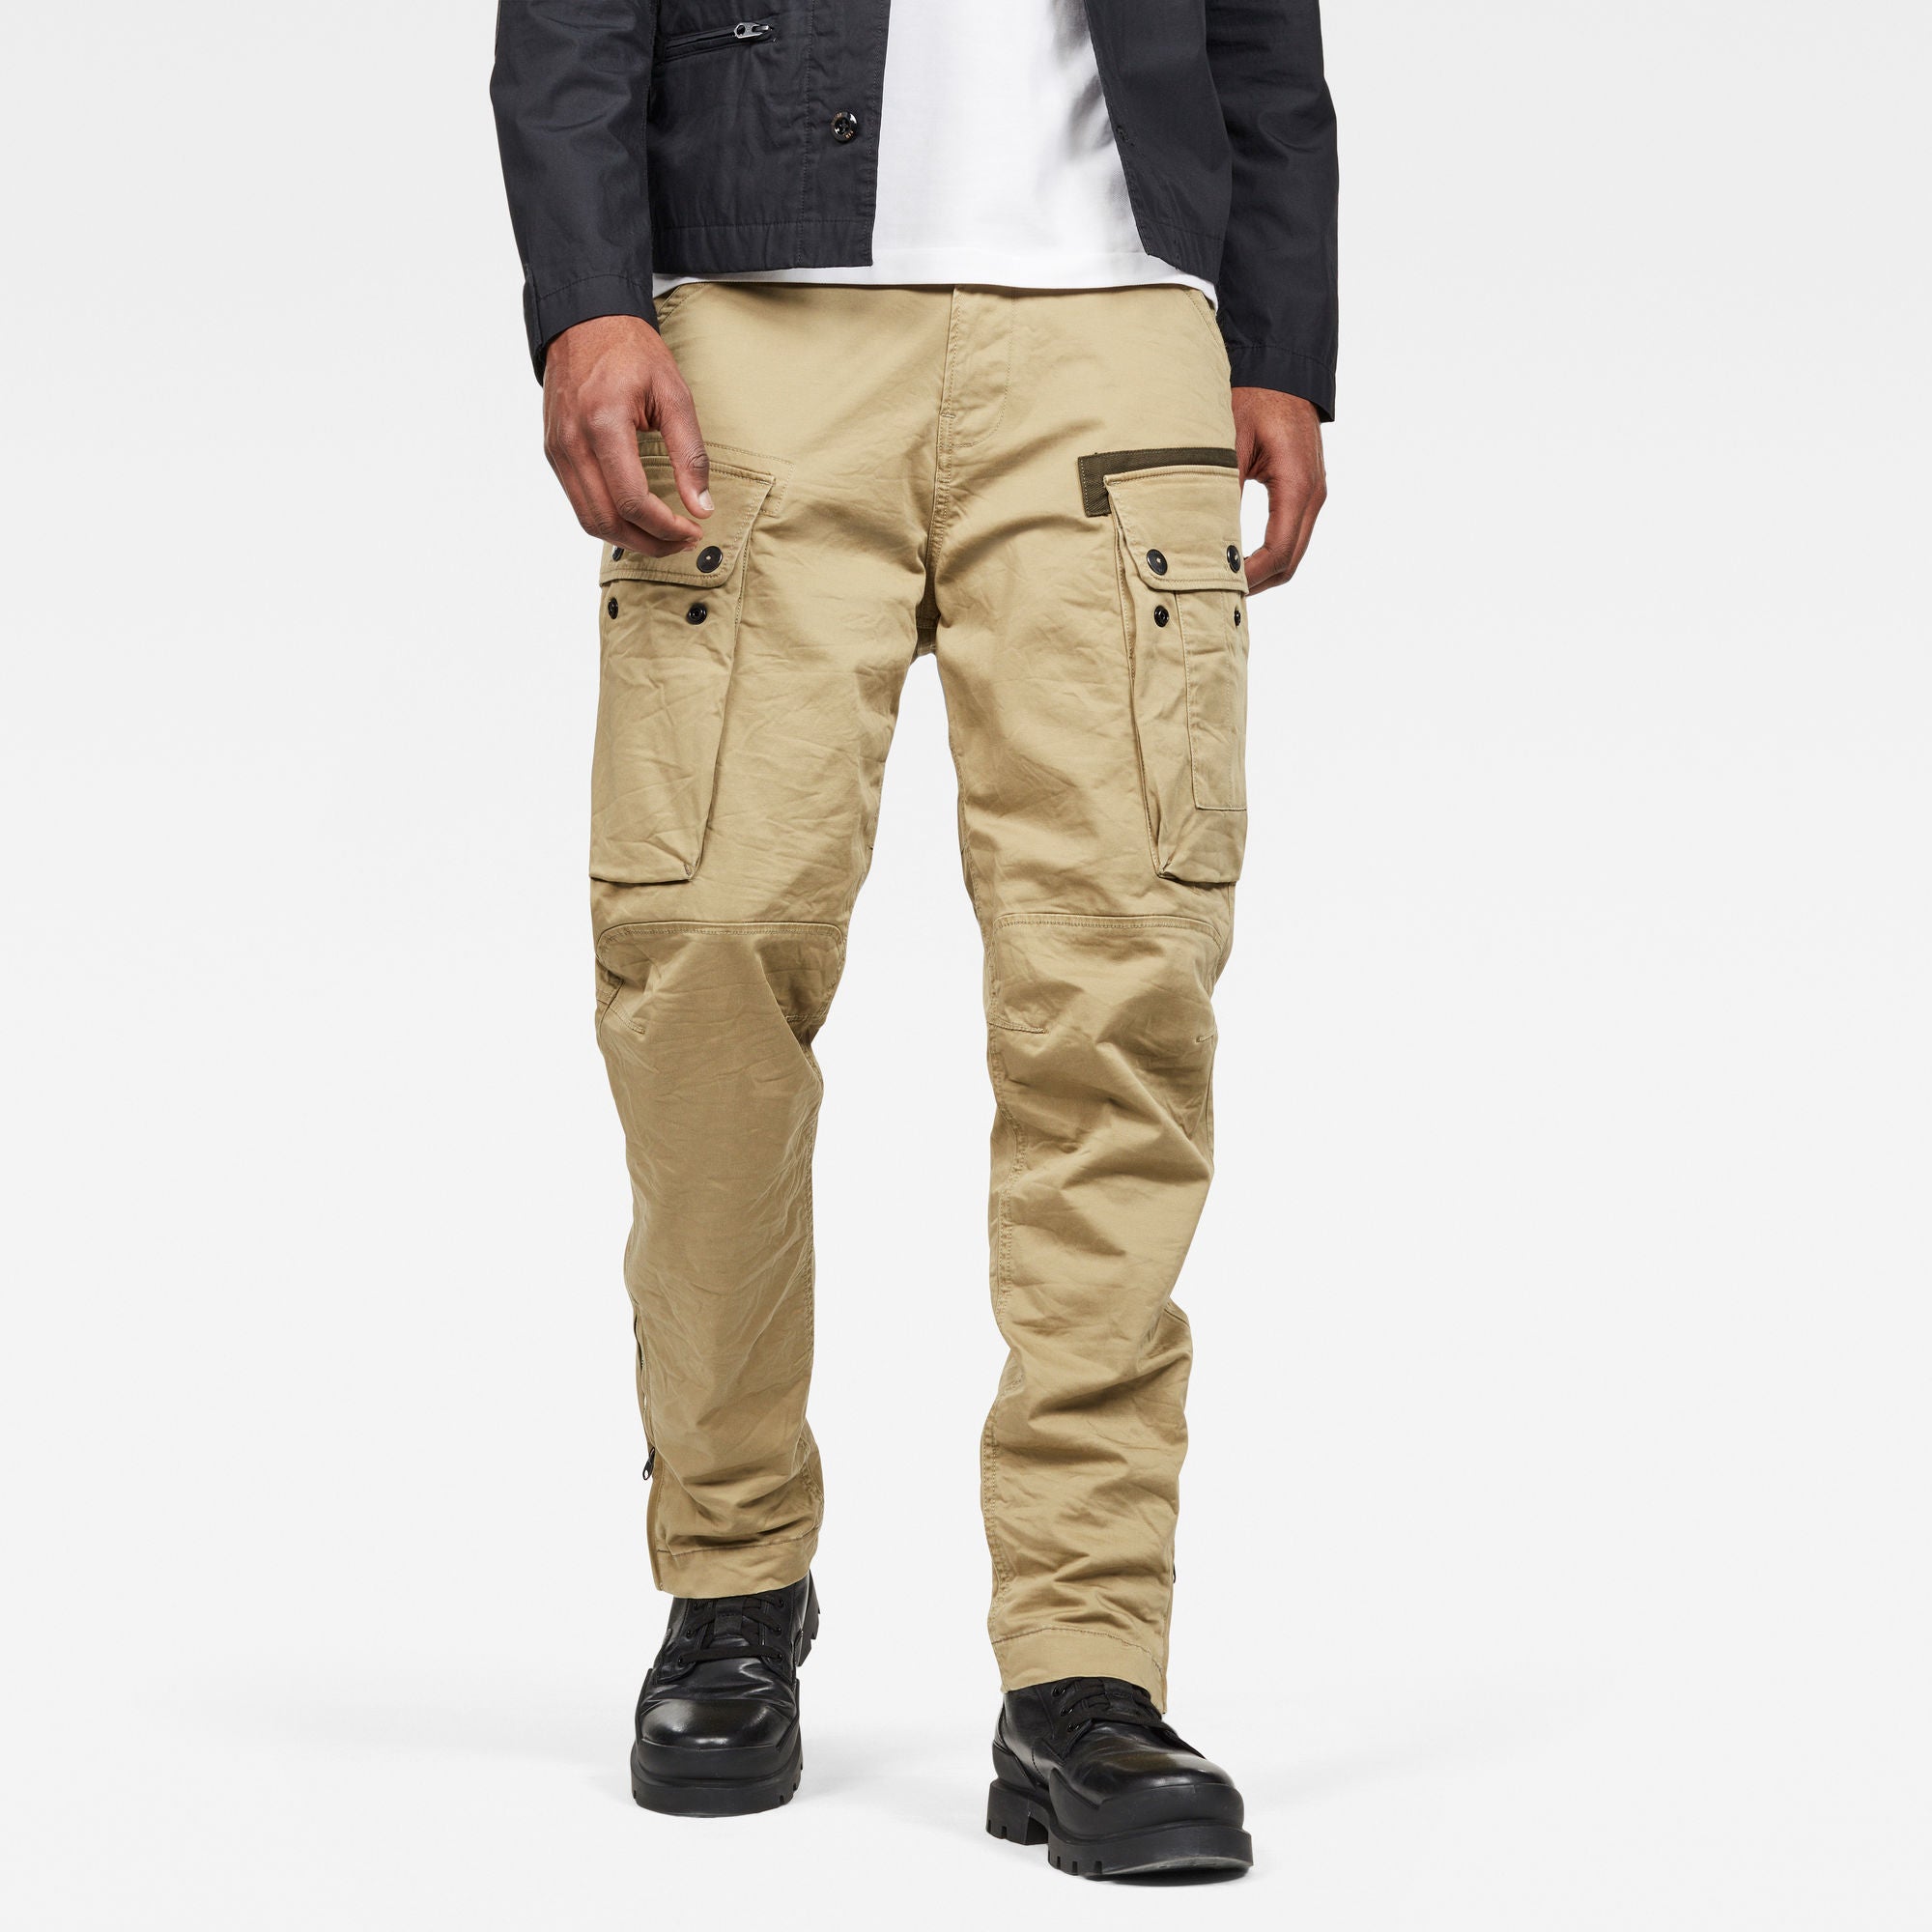 G-Star Raw Men’s straight tapered cargo pants fresh army green